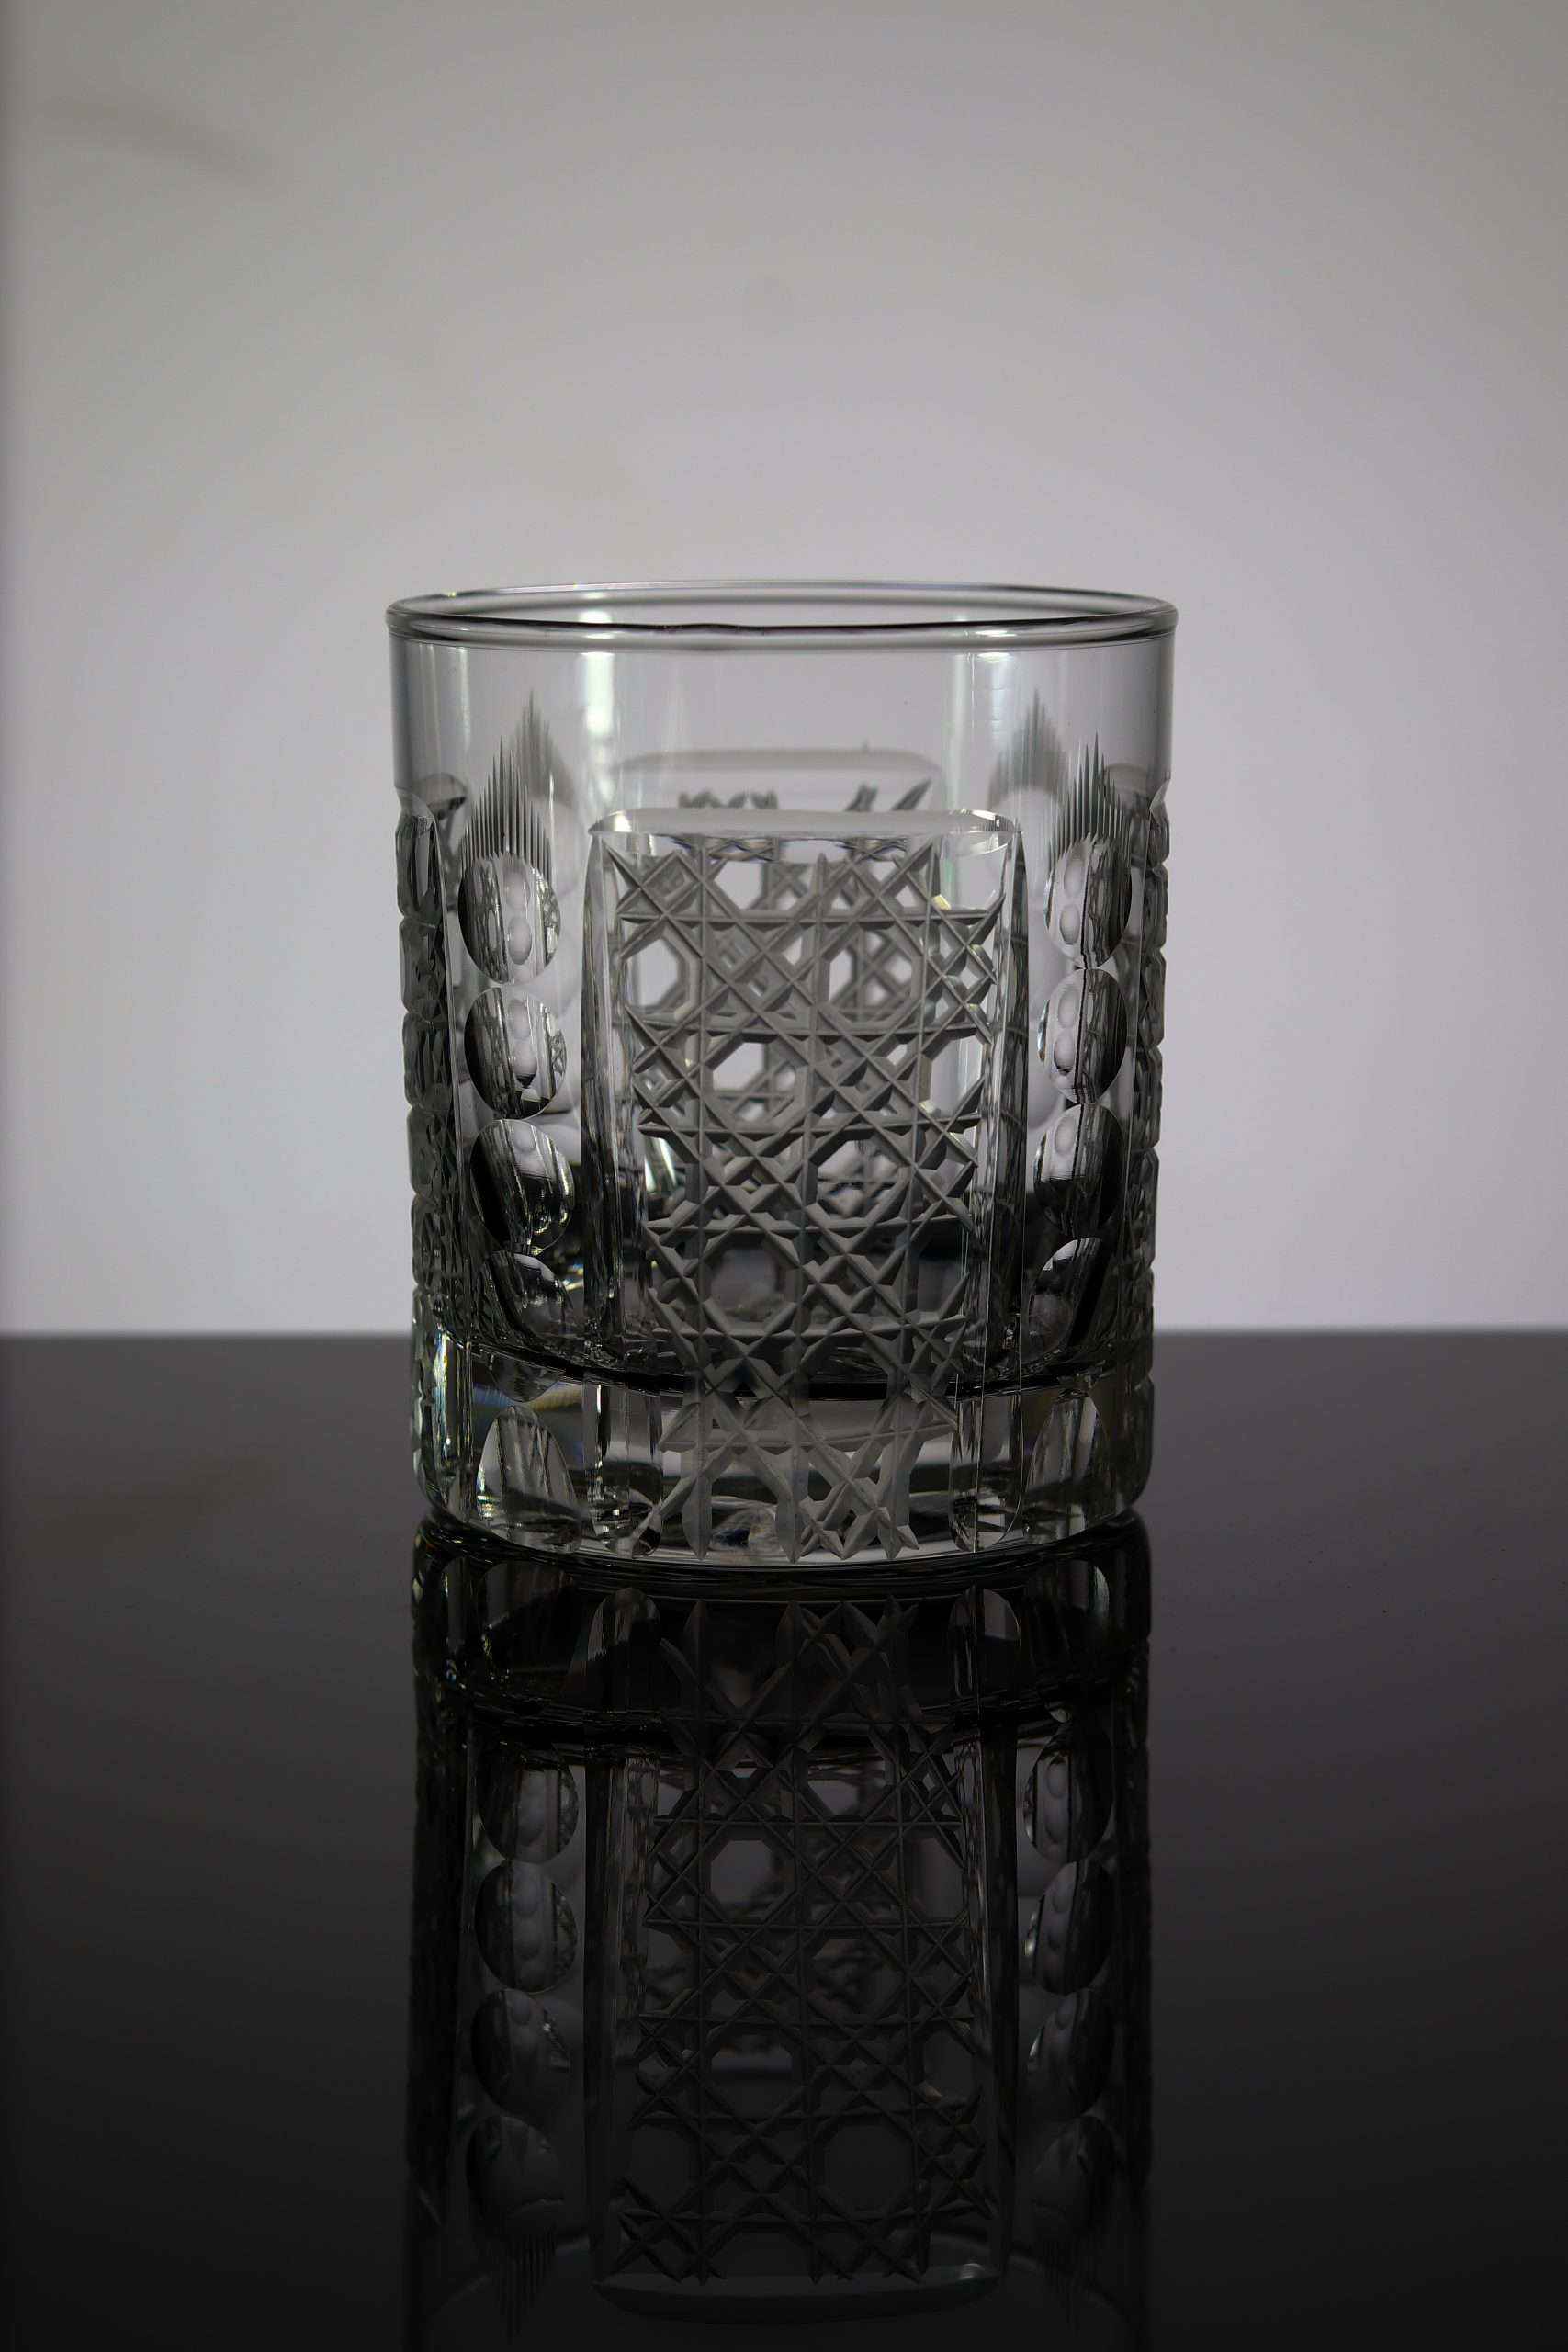 Ore Design Crystal Whiskey Glass